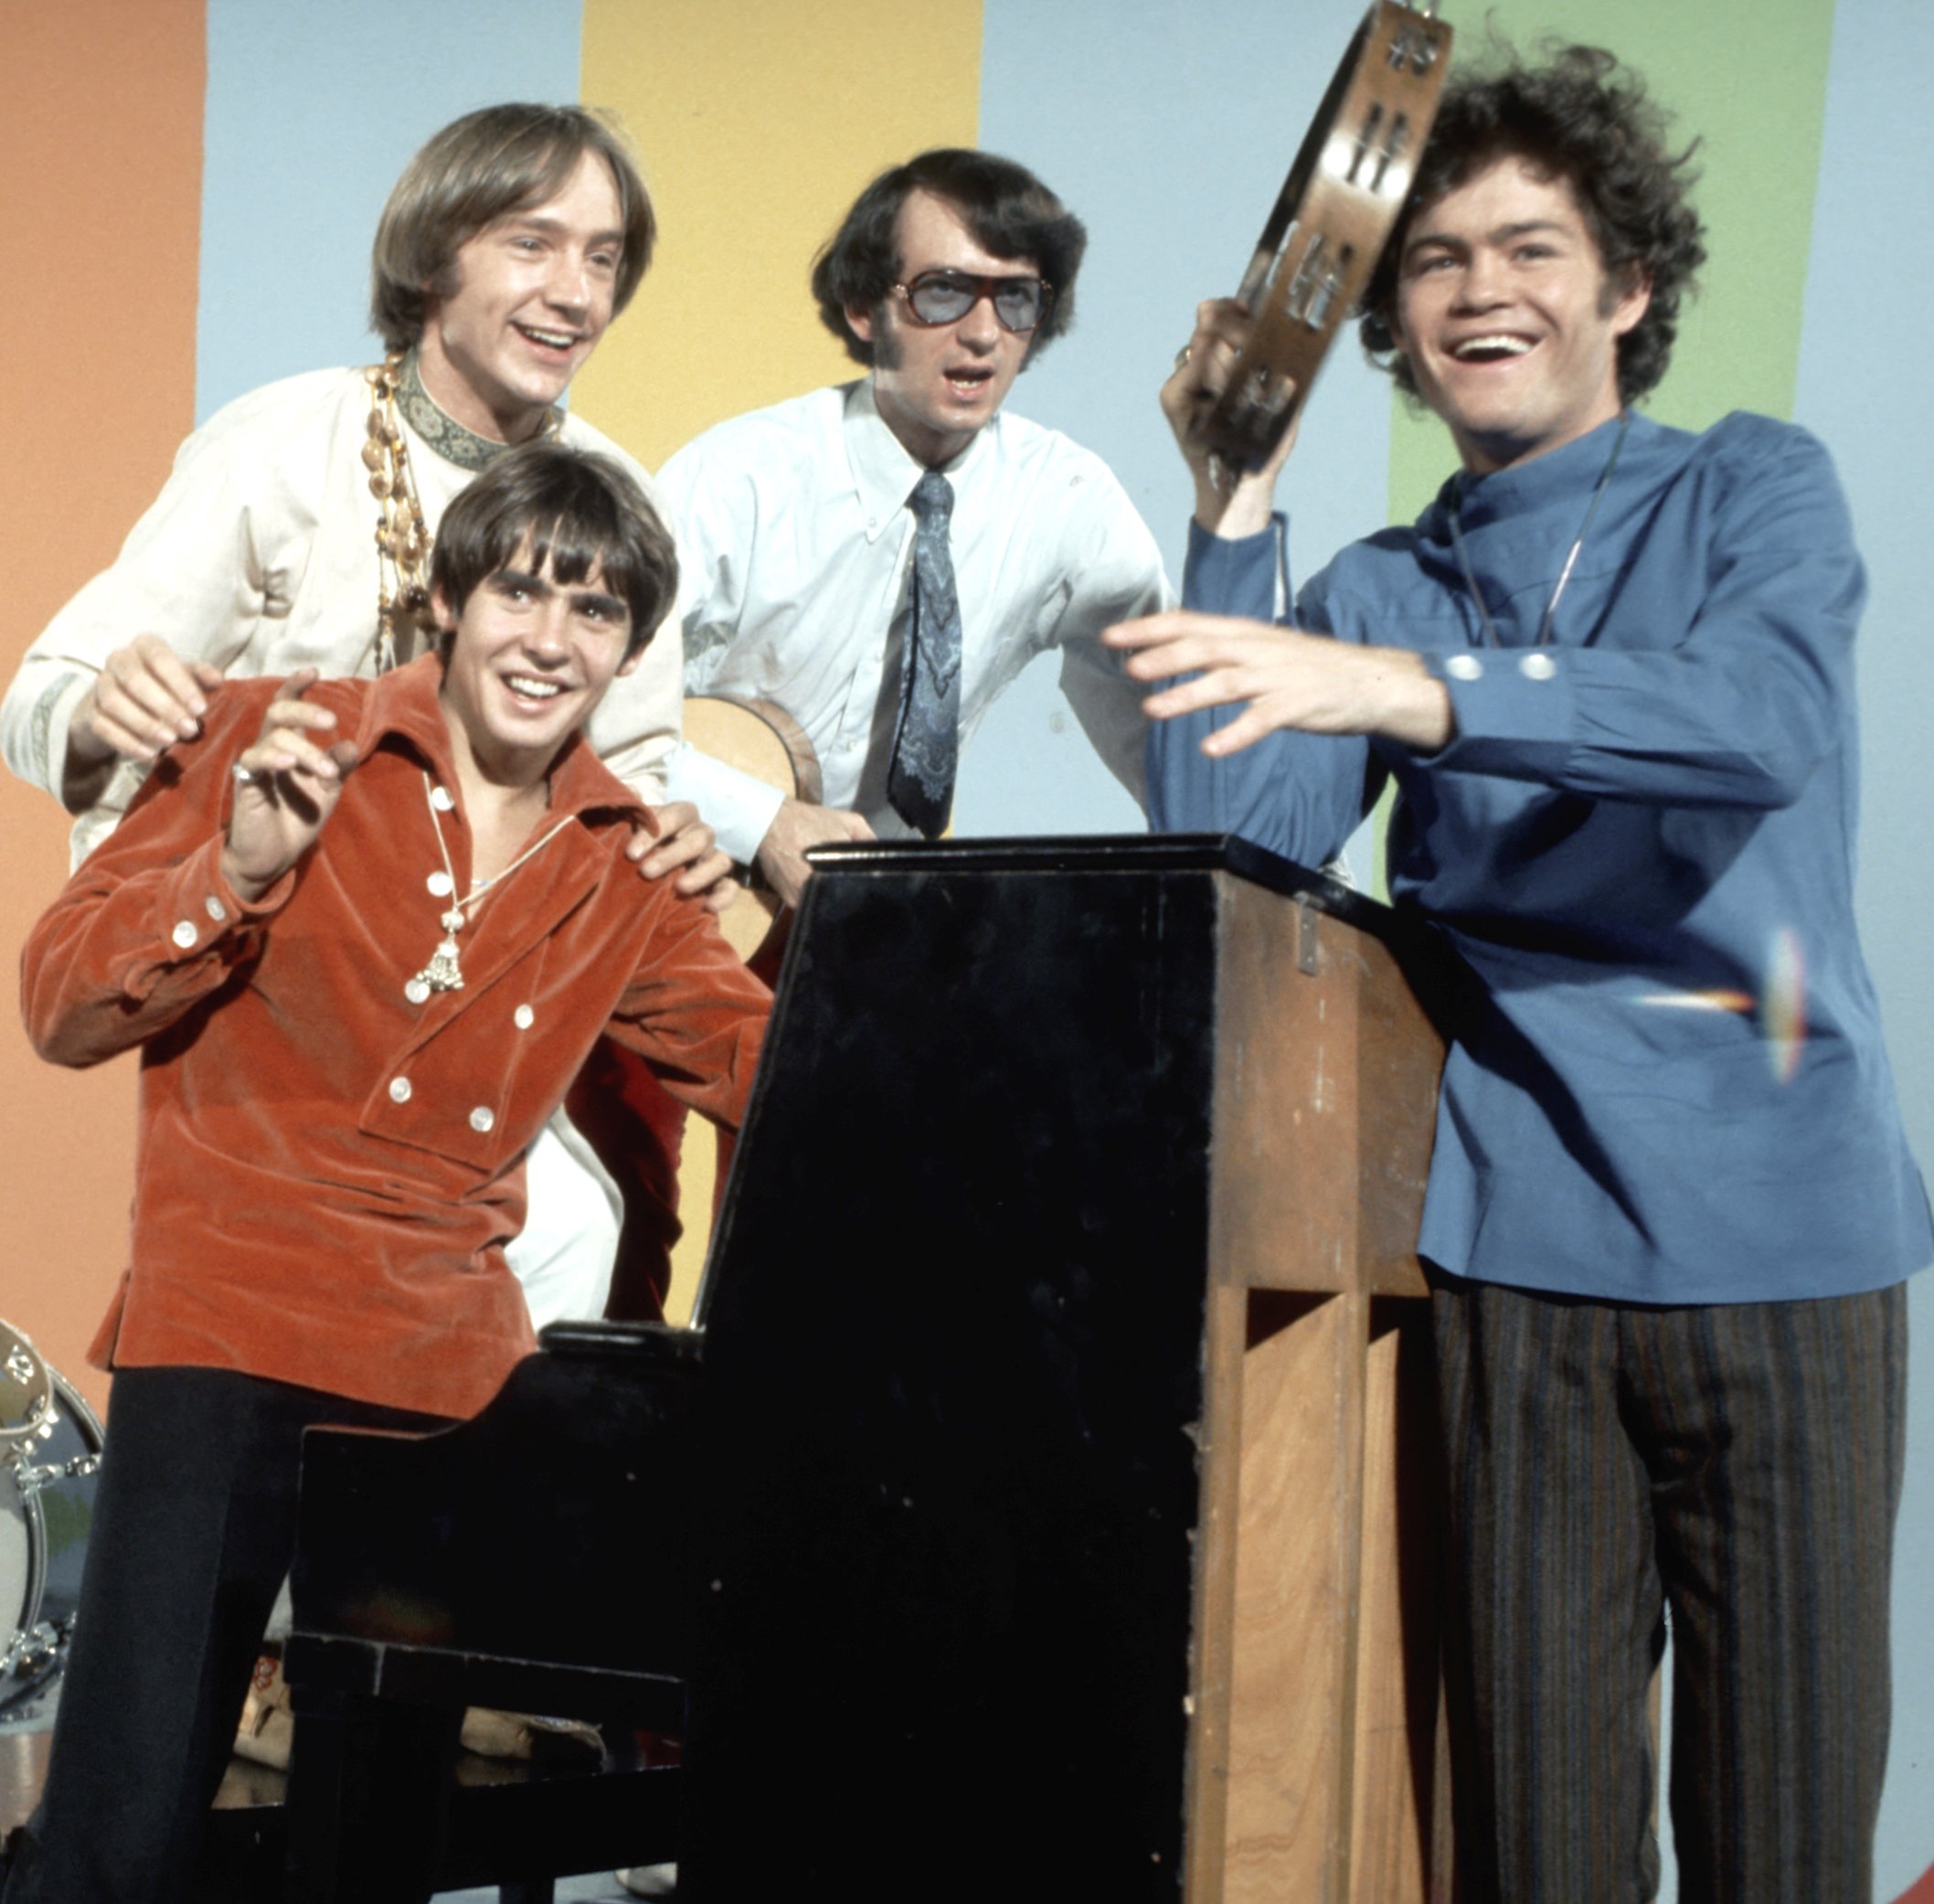 The Monkees' Peter Tork, Davy Jones, Mike Nesmith, and Micky Dolenz at a piano